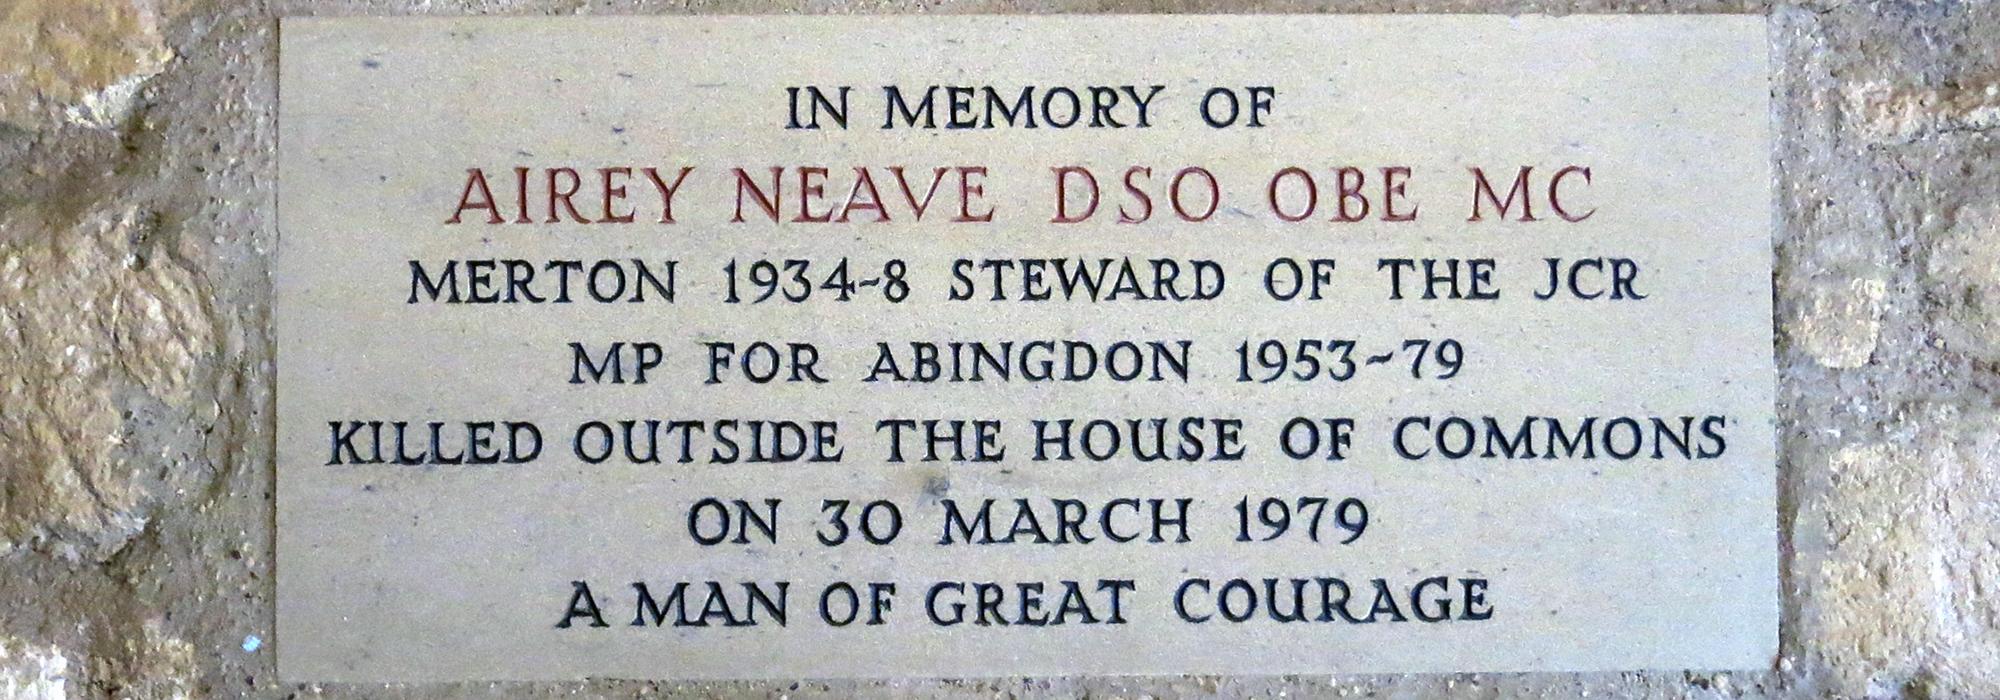 The memorial plaque to Airey Neave outside the Hall at Merton College